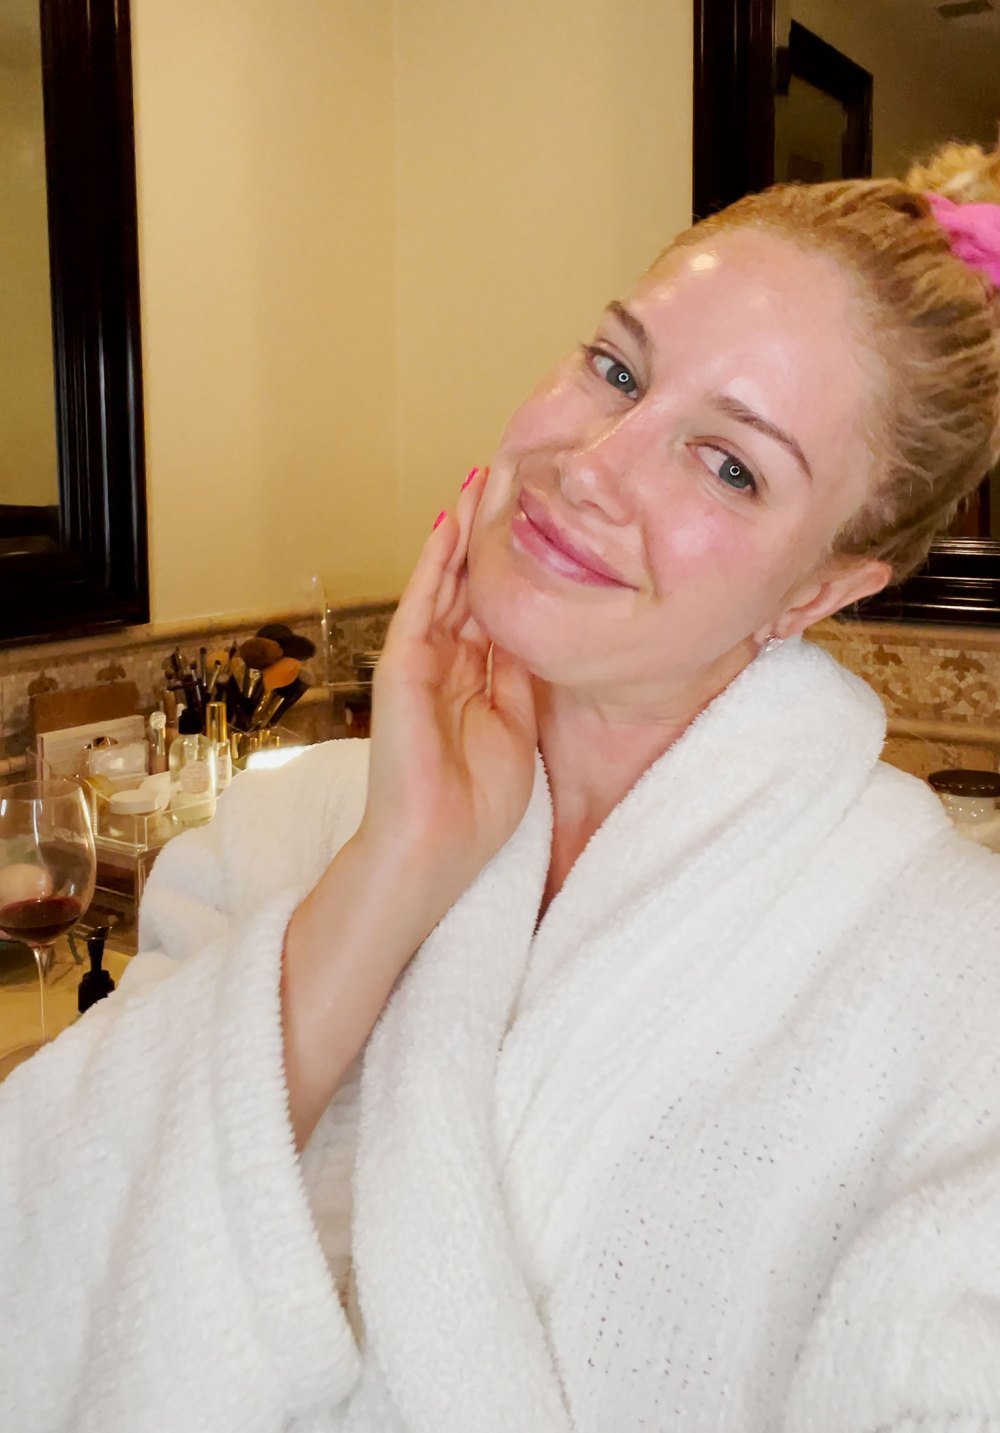 Frankincense, Horsetail and More Ancient Beauty Remedies Heidi Montag Swears By